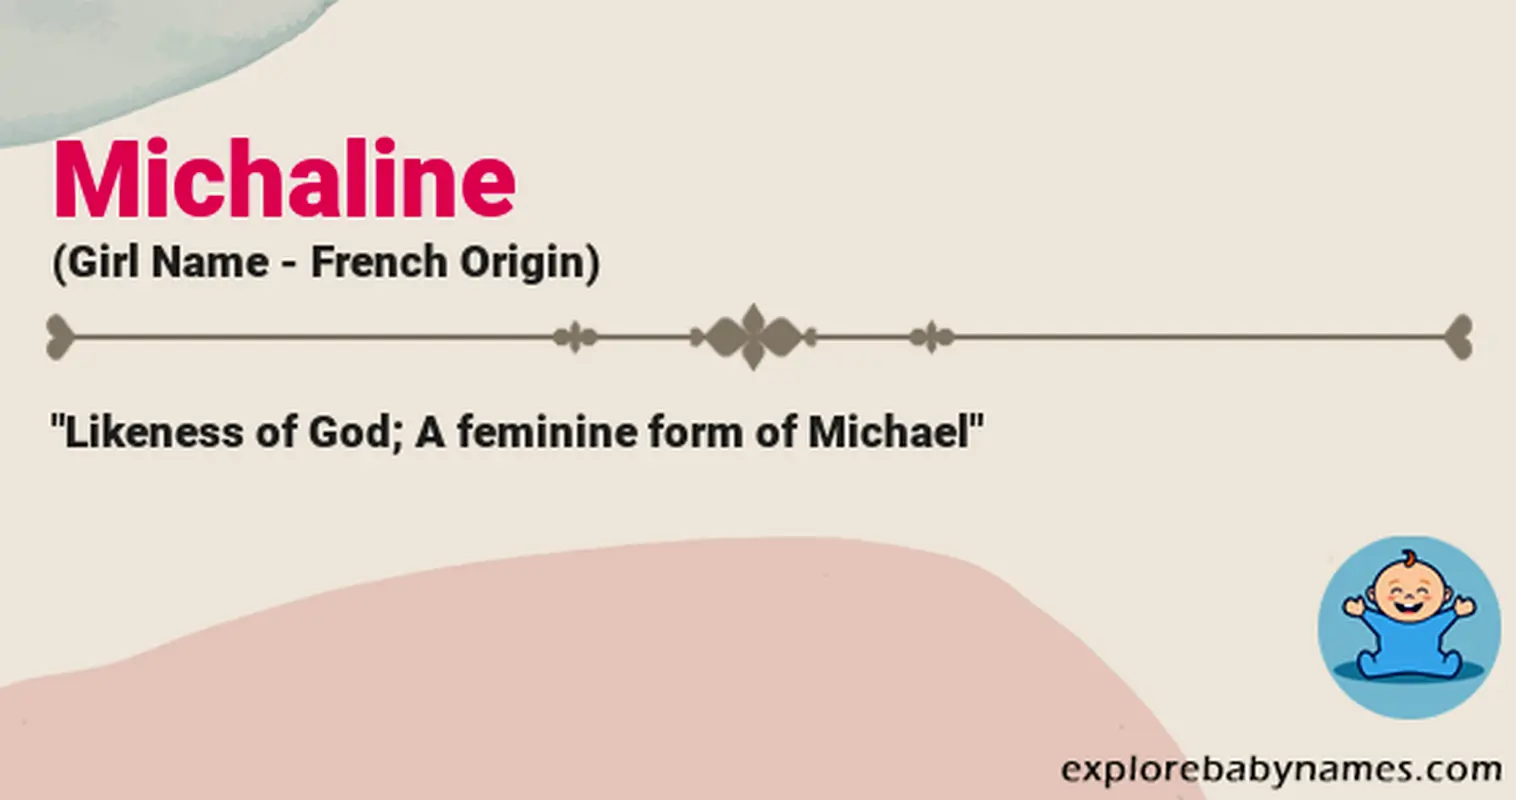 Meaning of Michaline